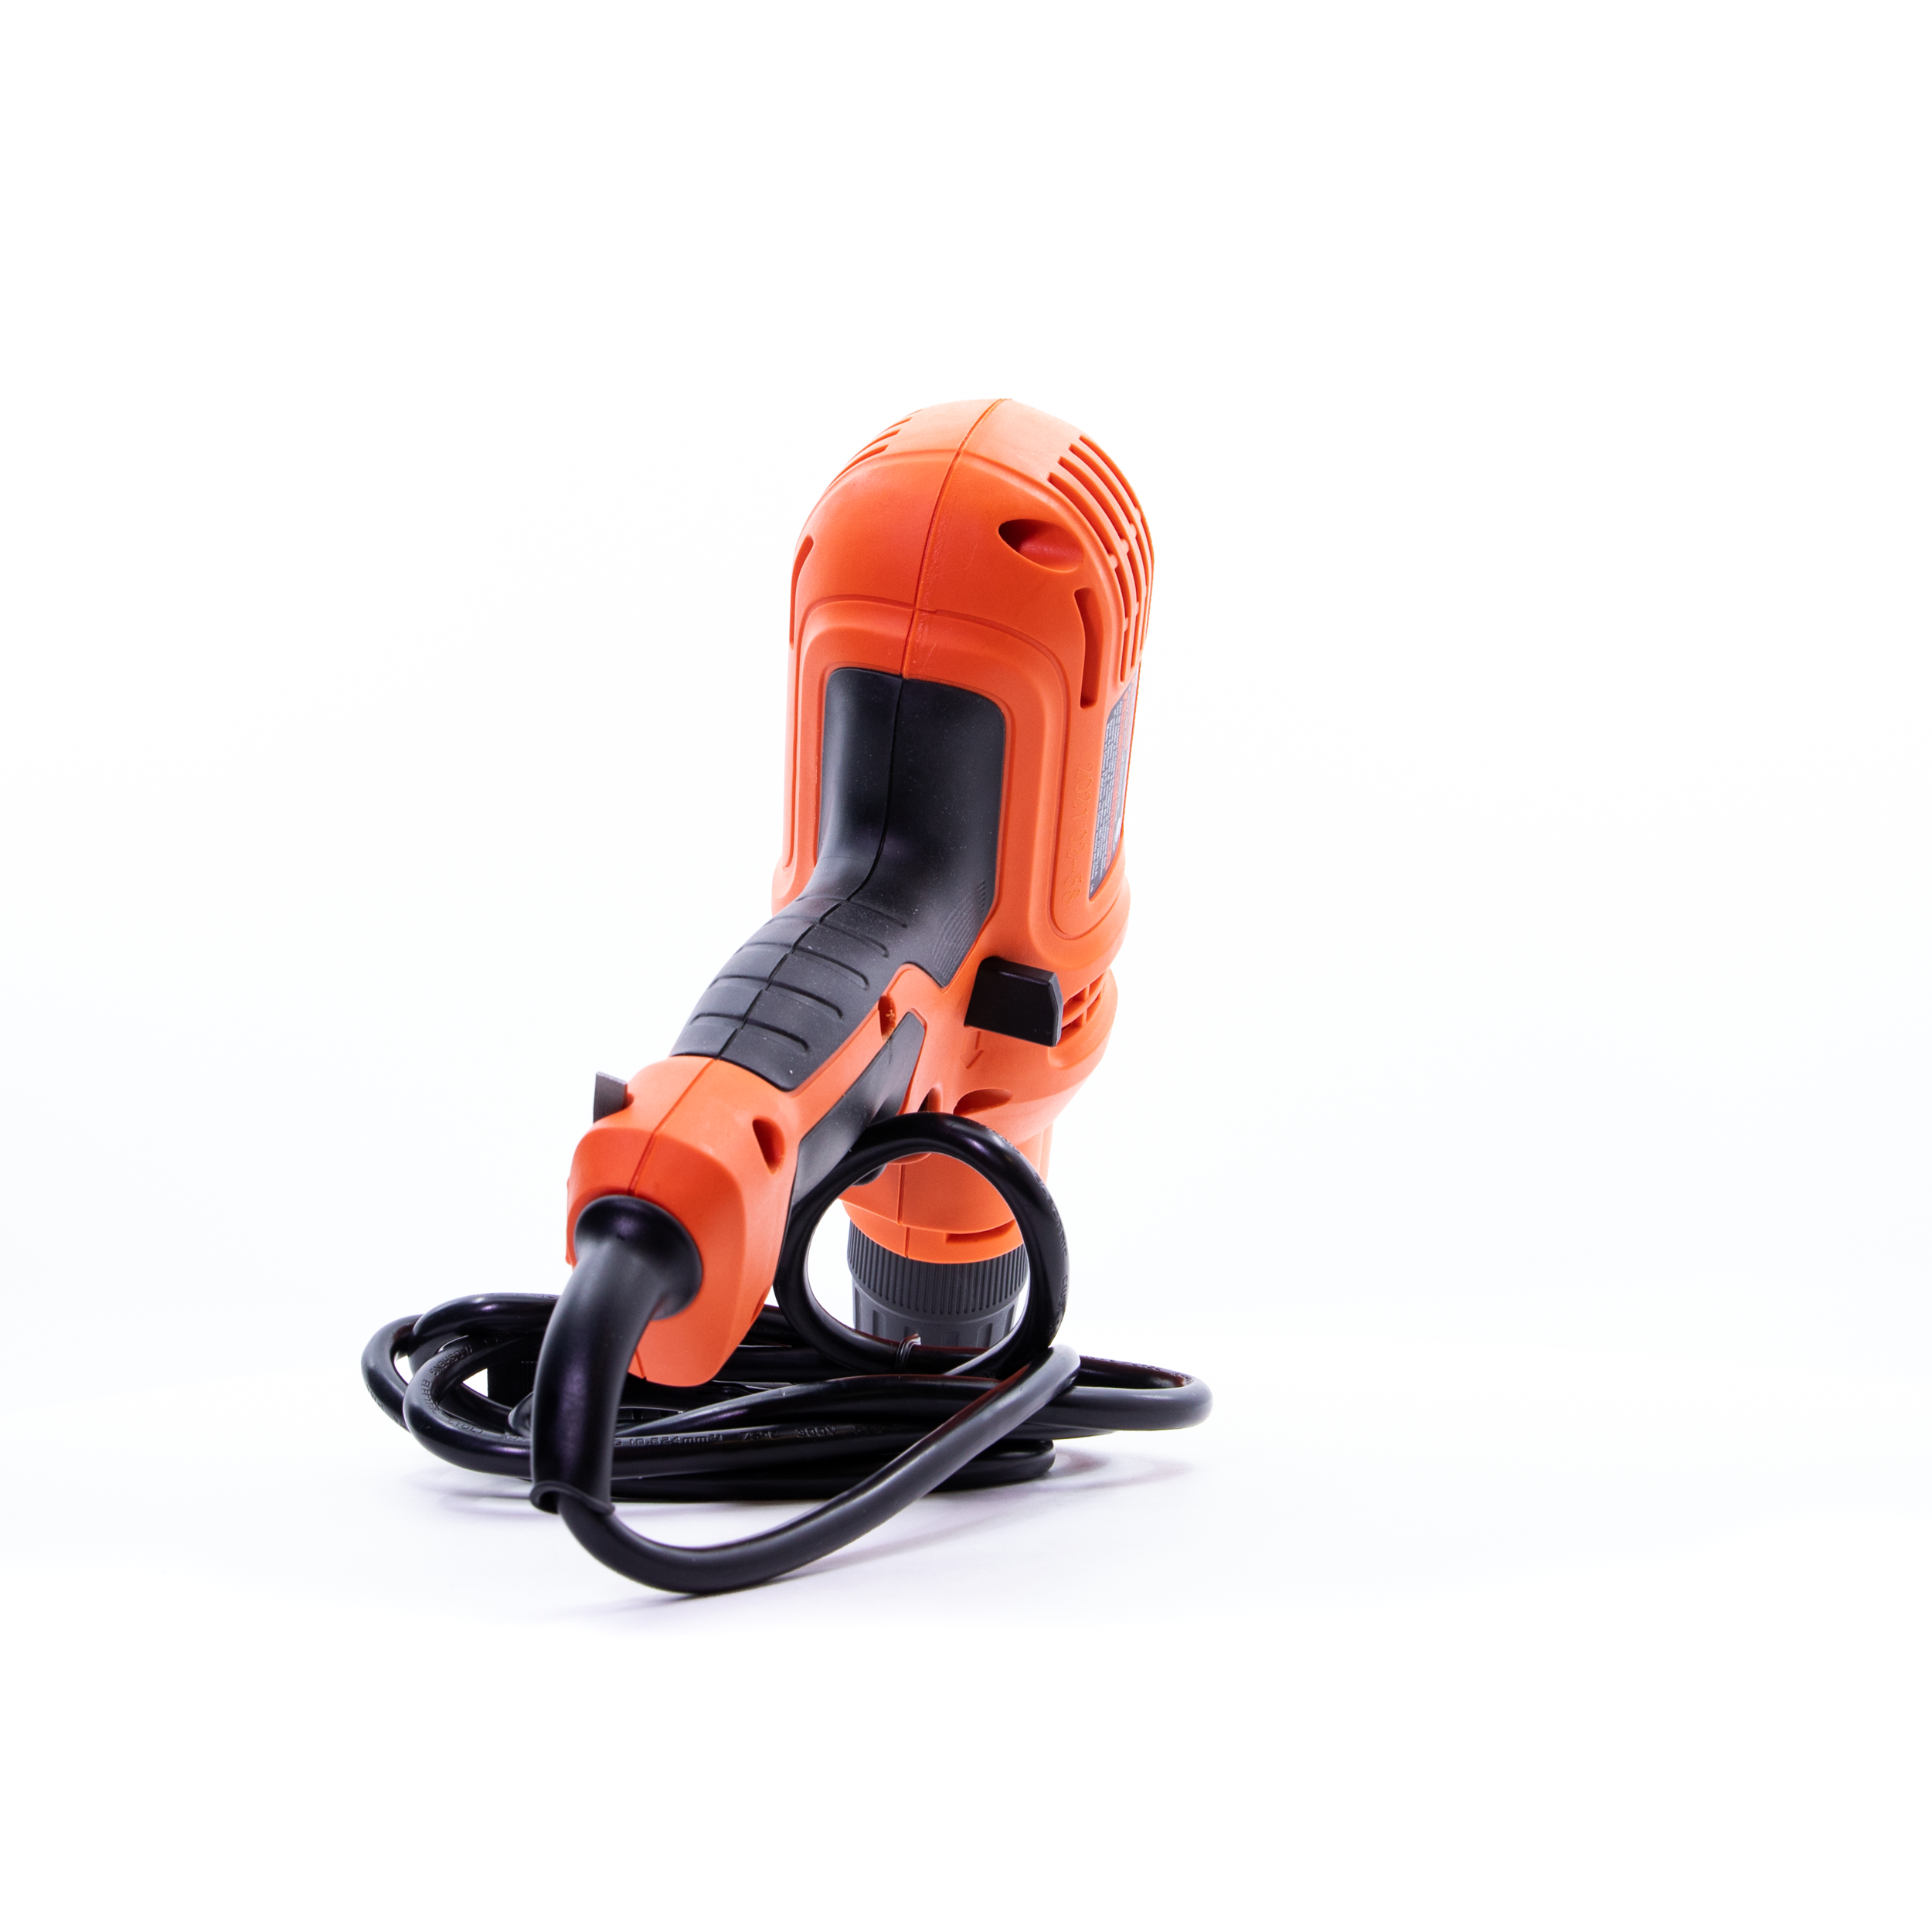 BLACK+DECKER Matrix 4 Amp 3/8 in. Corded Drill and Driver – Monsecta Depot